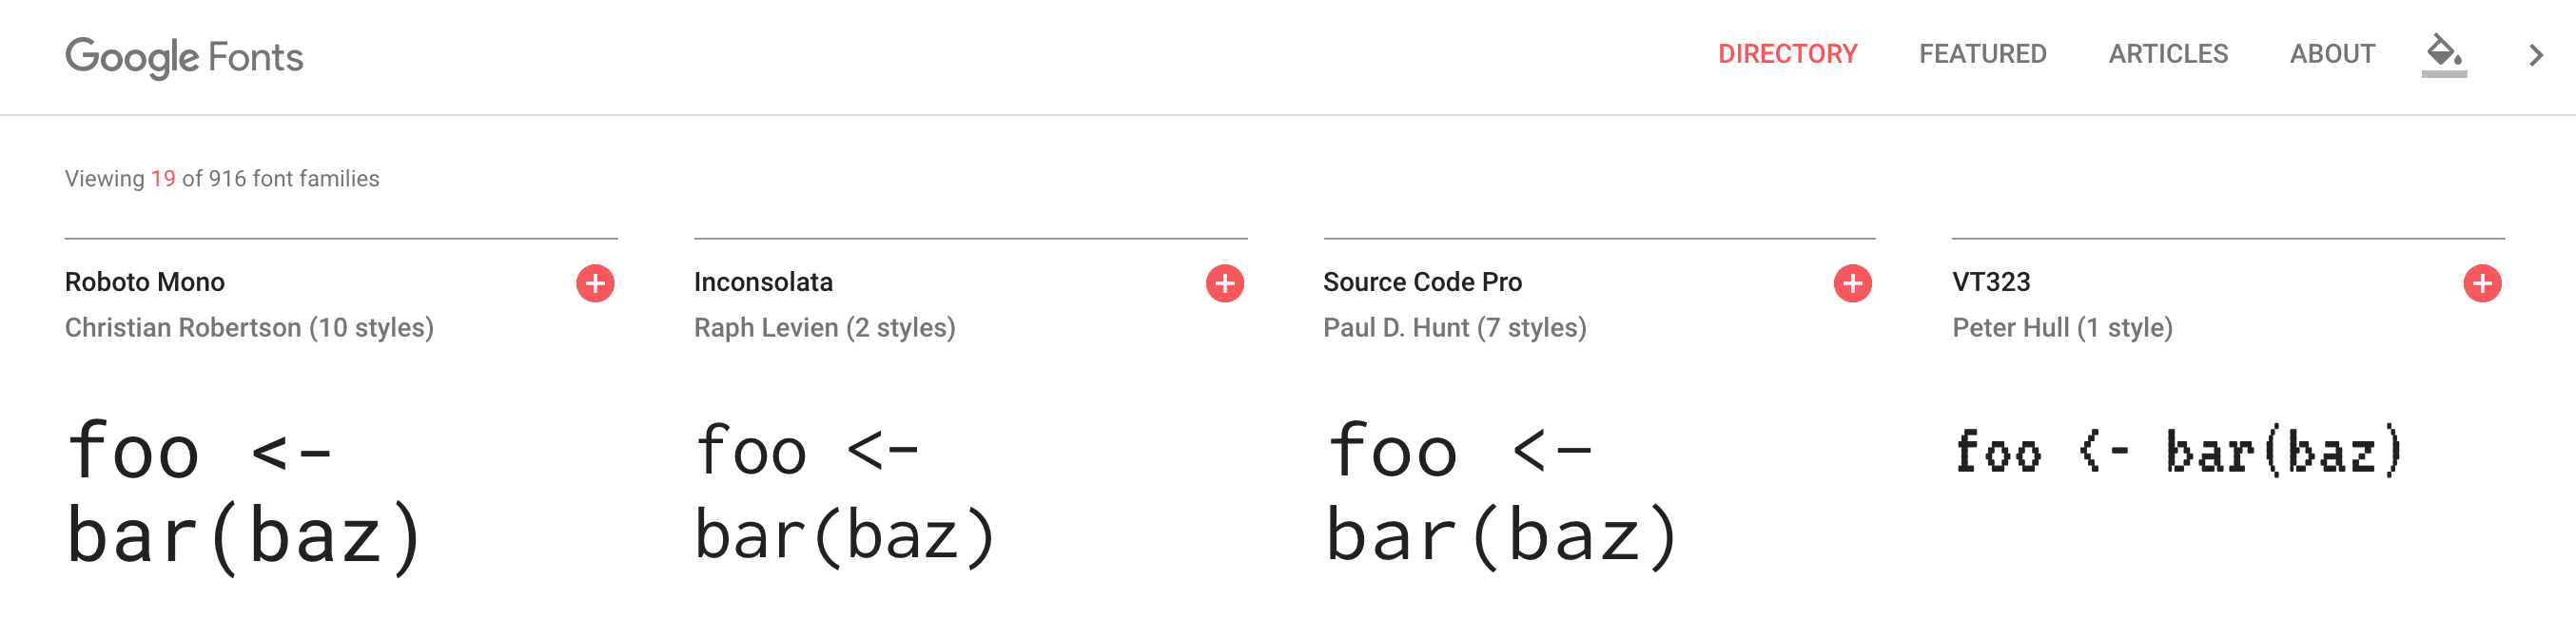 Google Fonts web page showing a line of code rendered in some different monospace fonts so they can be compared.